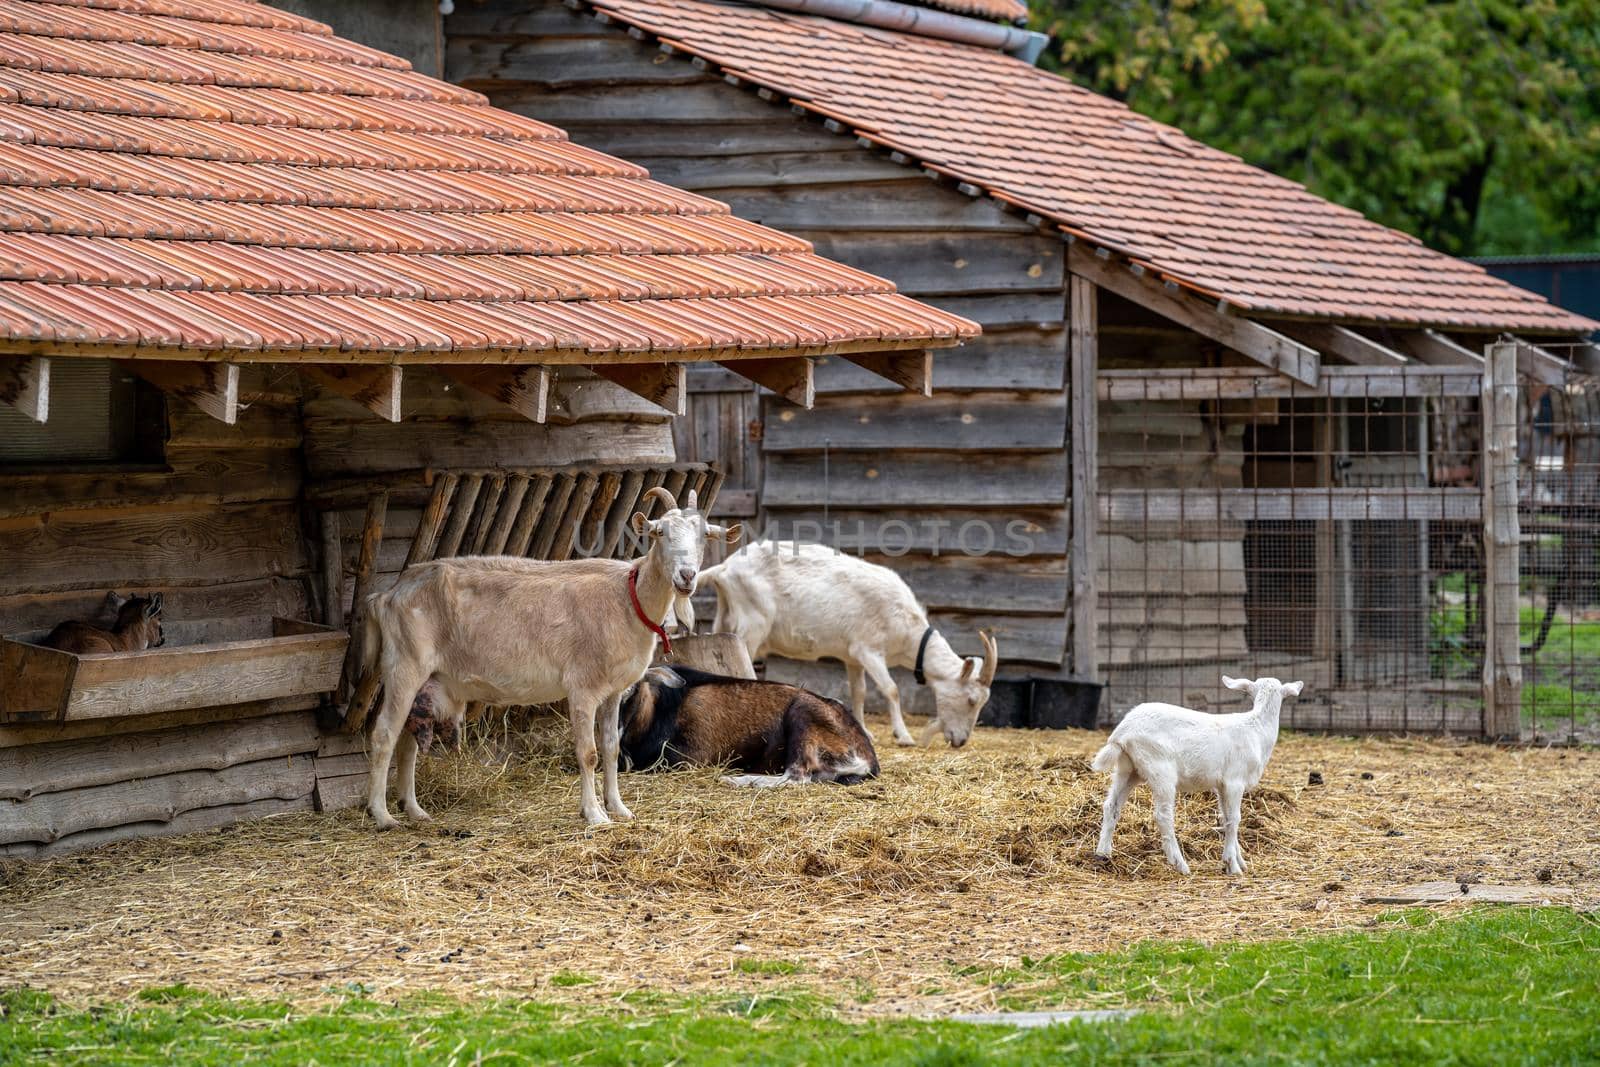 Goats in an outdoor paddock on a farm by Edophoto